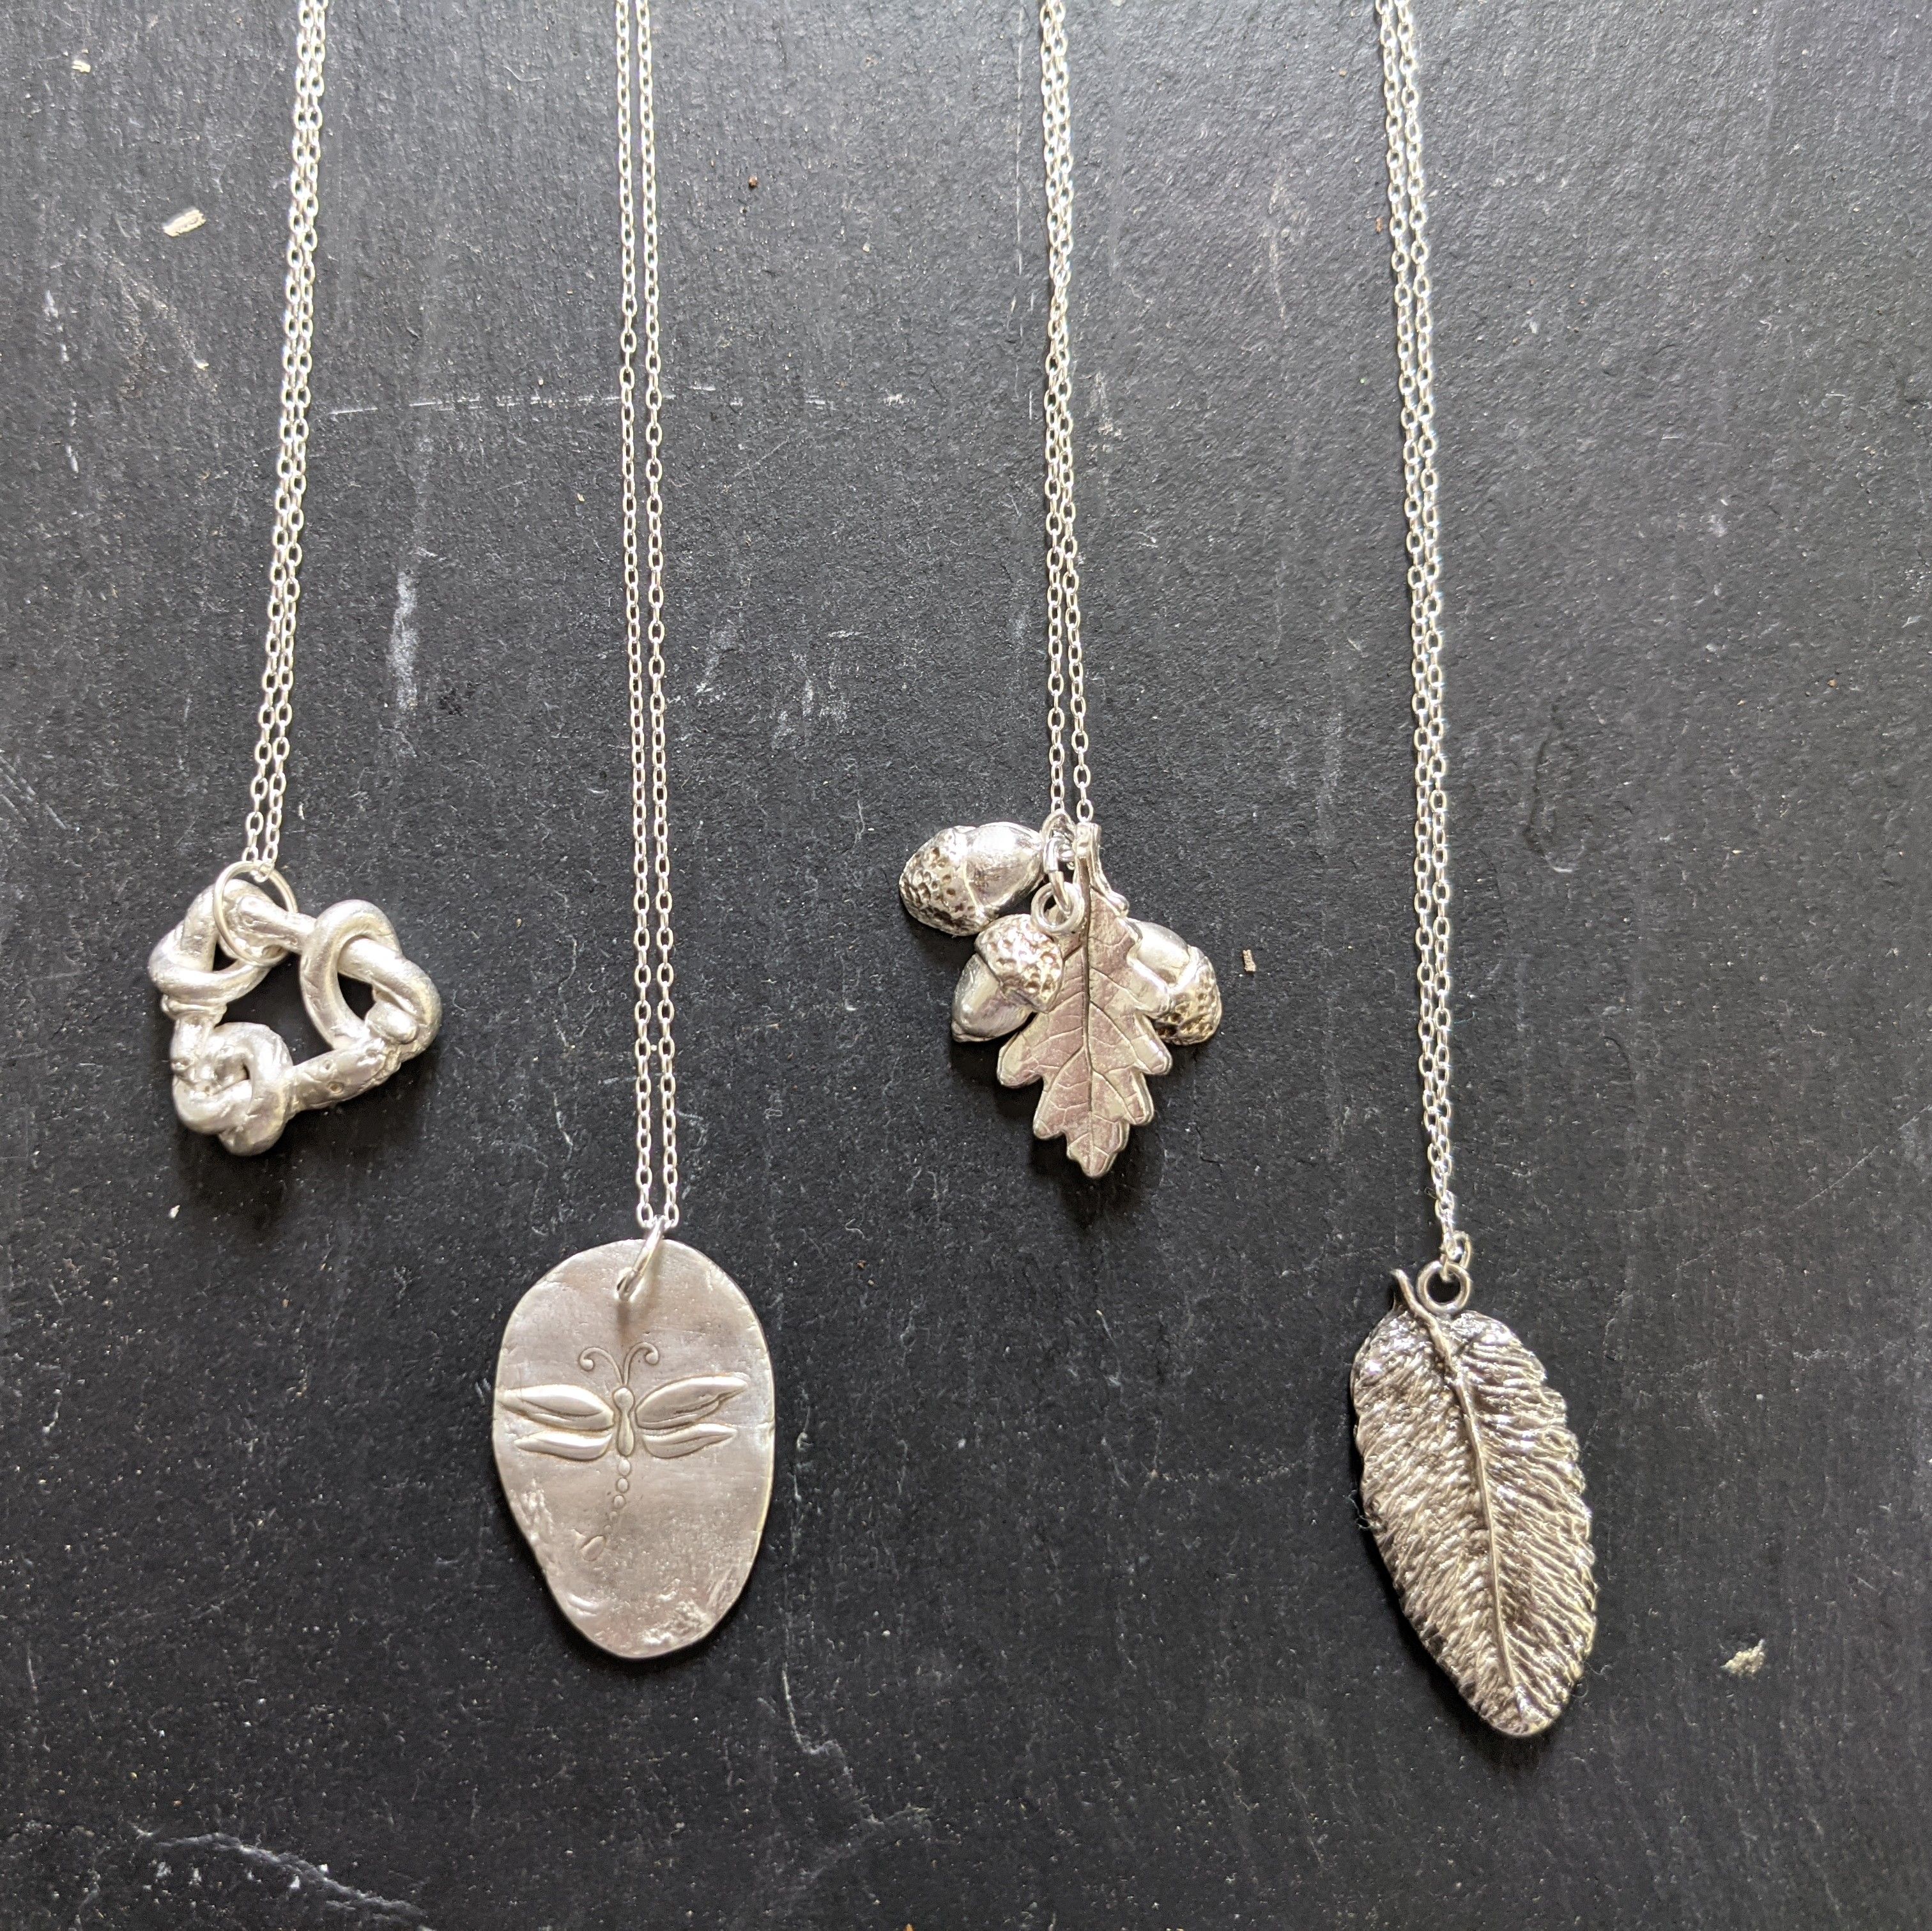 Beginners silver clay full day workshop - make a pendant or drop